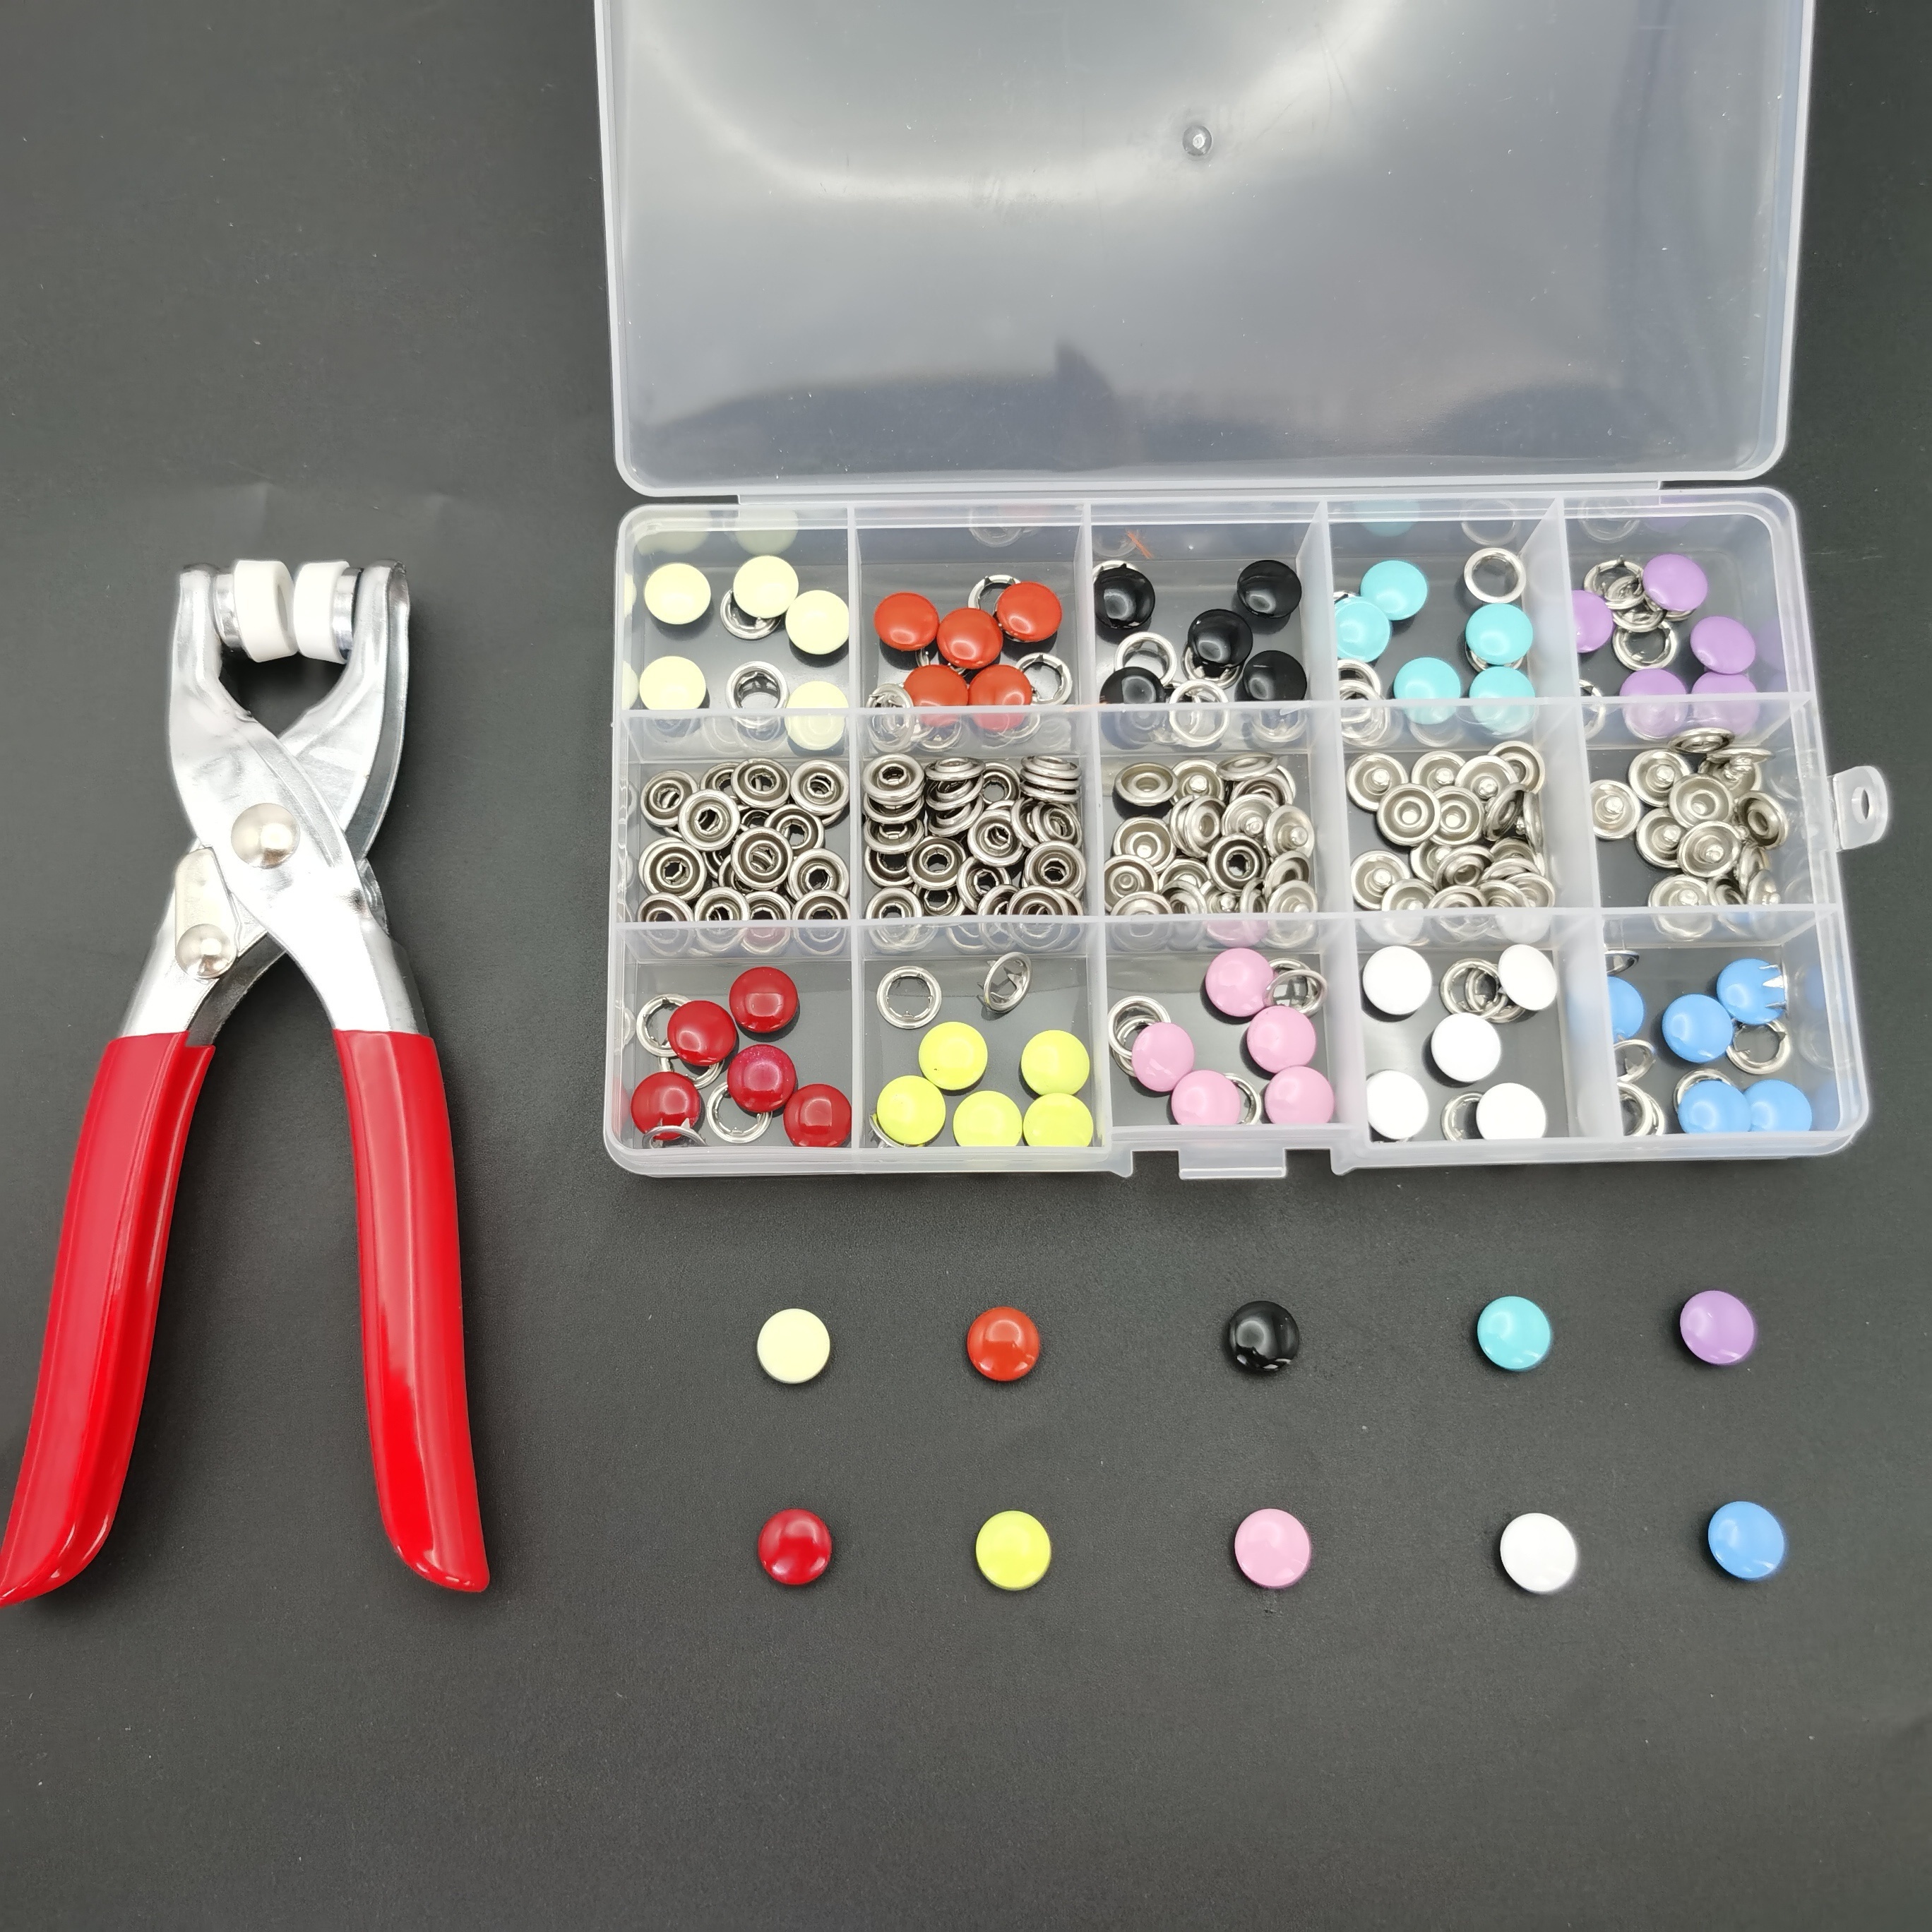 

50pcs Snap Button Kit, Invisible Color Metal Buckle Snaps For Sewing, Snap Fasteners Kit, Buttons Set With Hand Pressure Pliers Tool For Diy Crafts Clothes Hats Bags